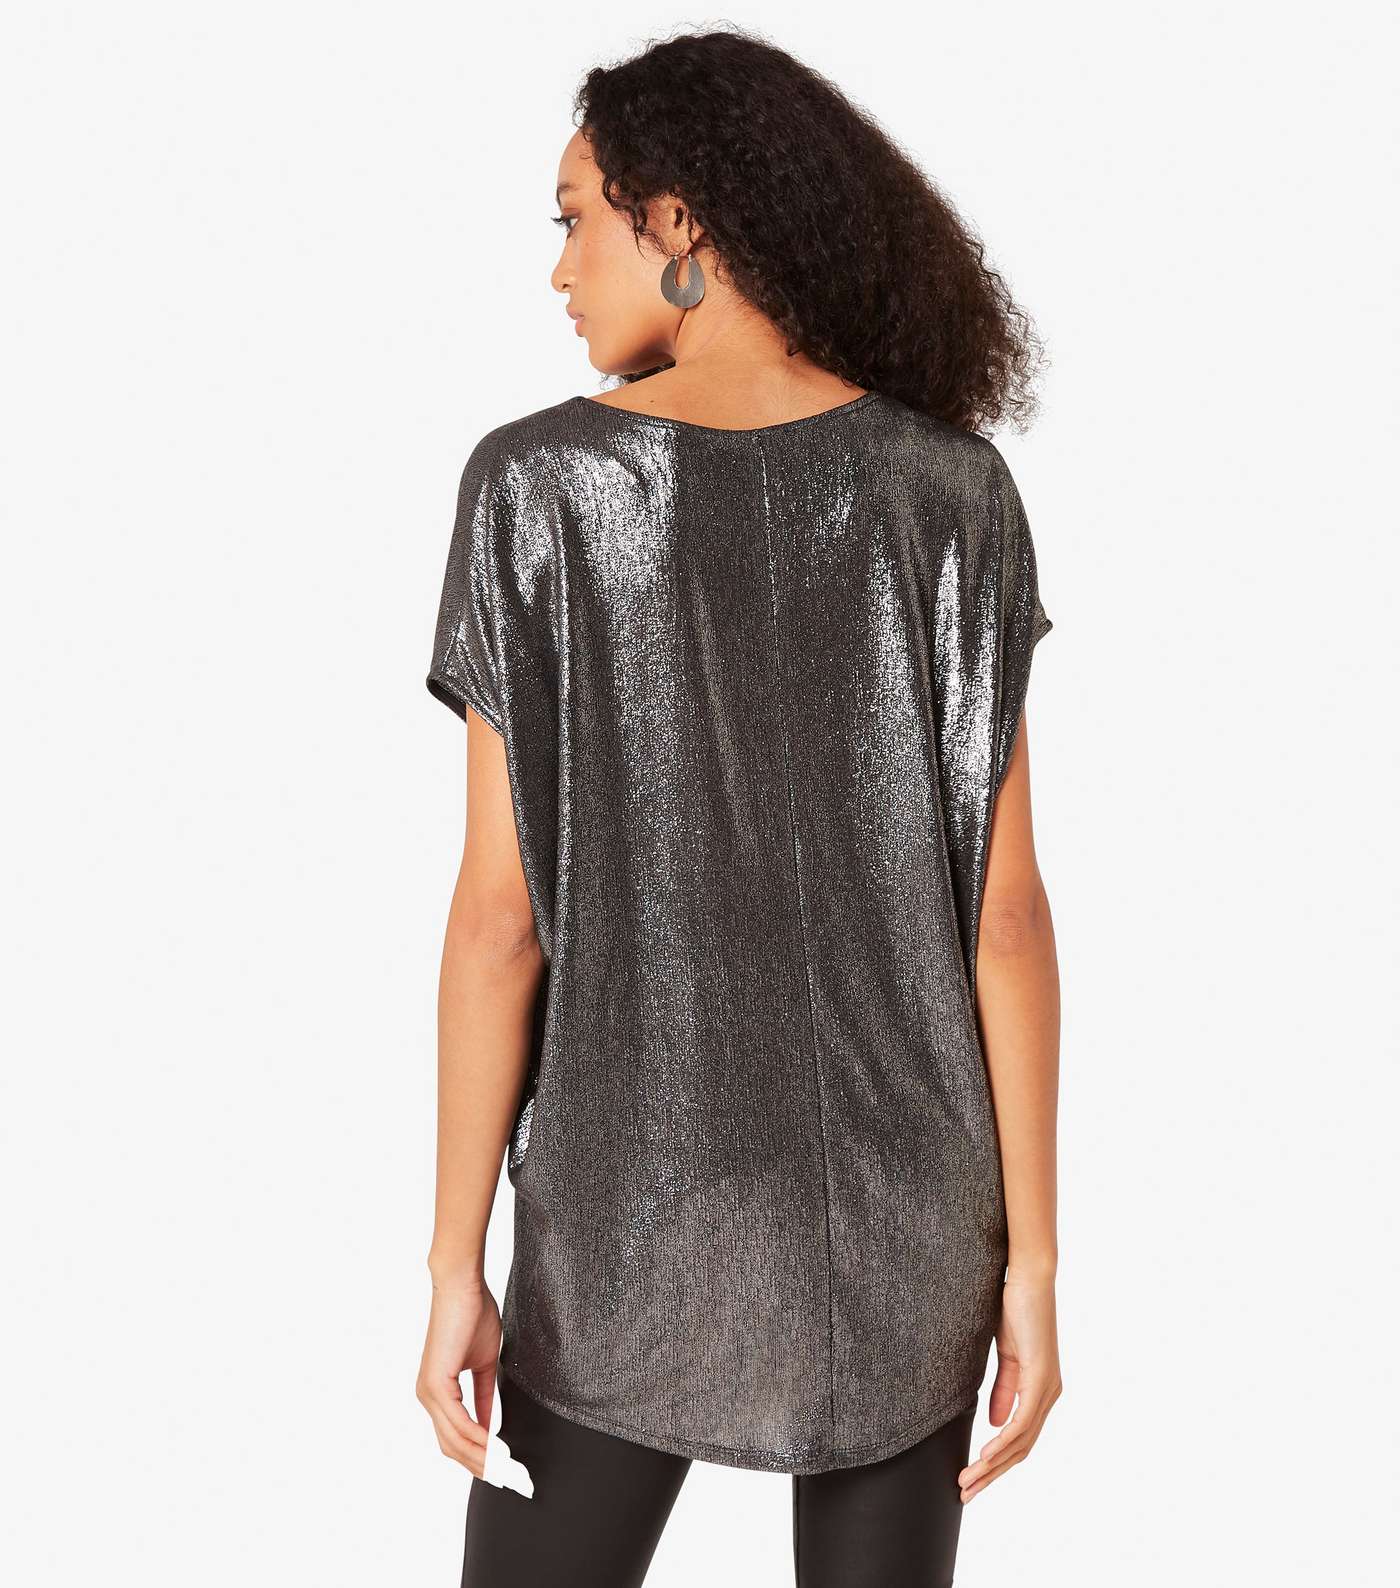 Apricot Silver Short Sleeve Top Image 3